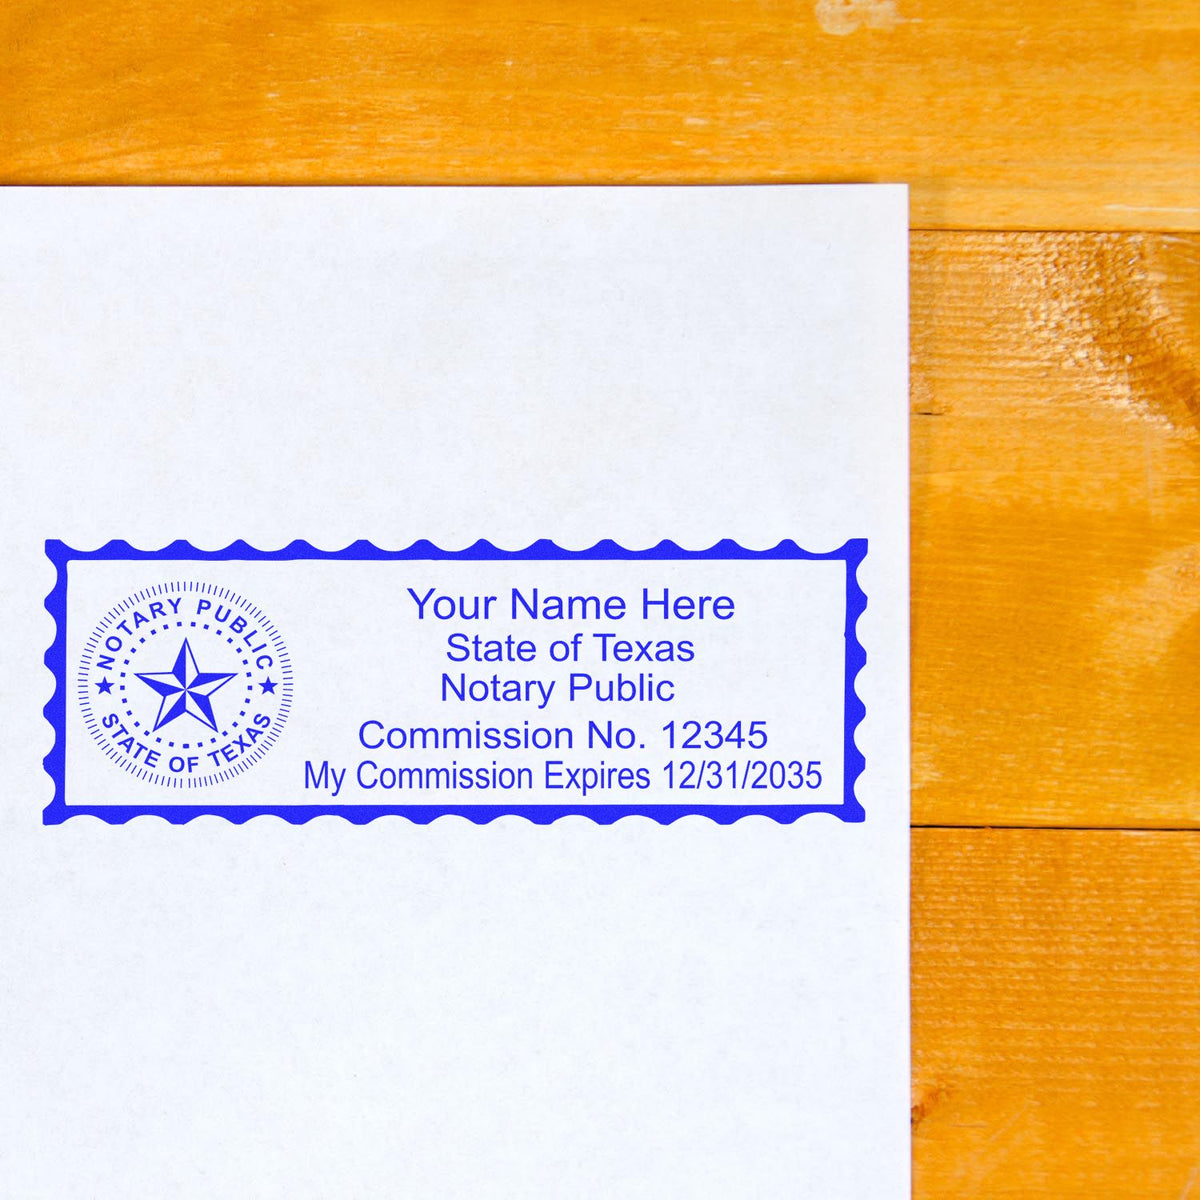 A stamped impression of the Super Slim Texas Notary Public Stamp in this stylish lifestyle photo, setting the tone for a unique and personalized product.